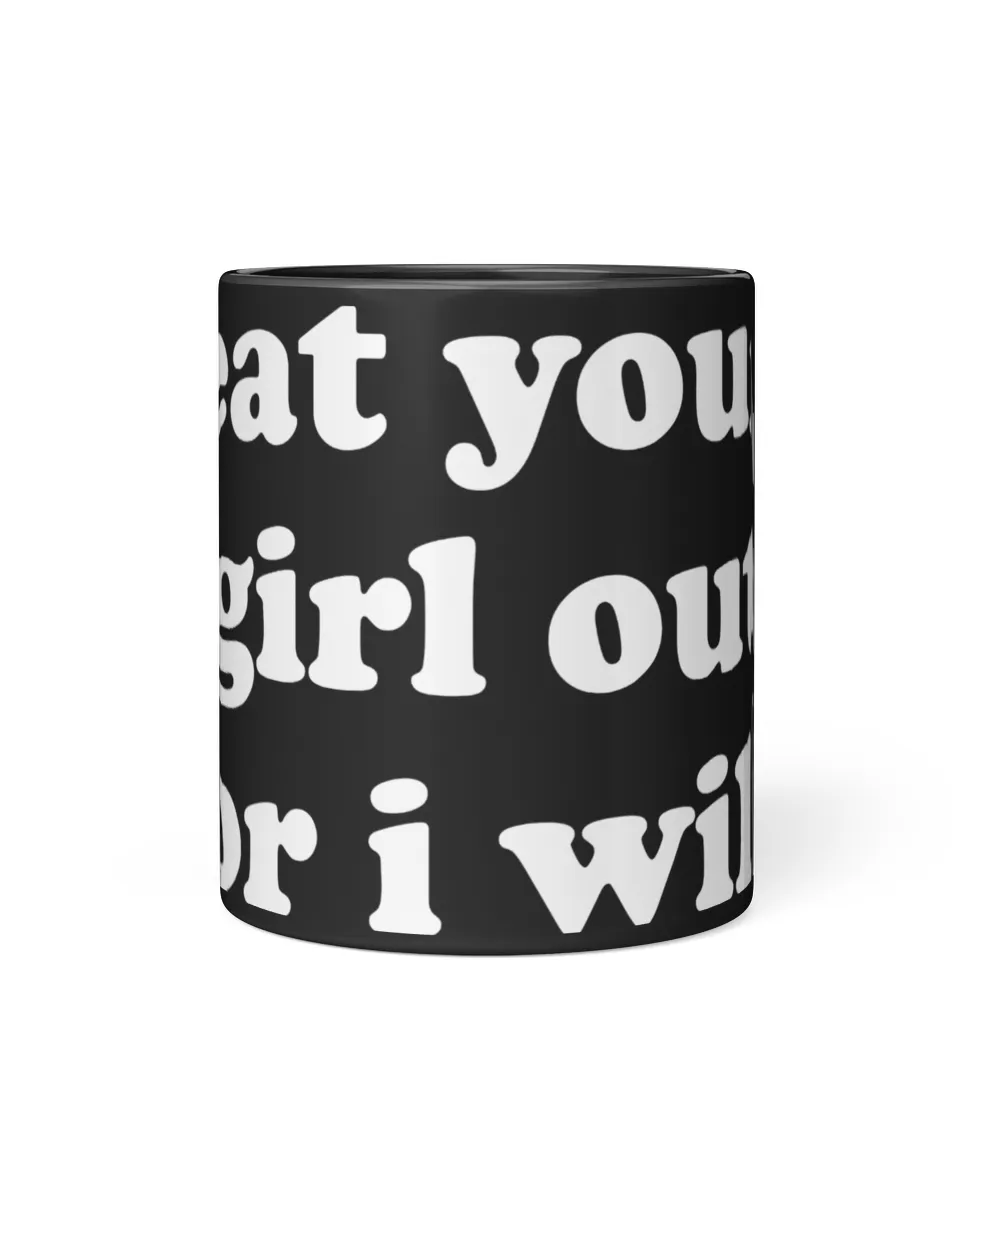 Cheeky Humor Unleashed: 'Eat Your Girl Out or I Will' Apparel and Drinkware Collection